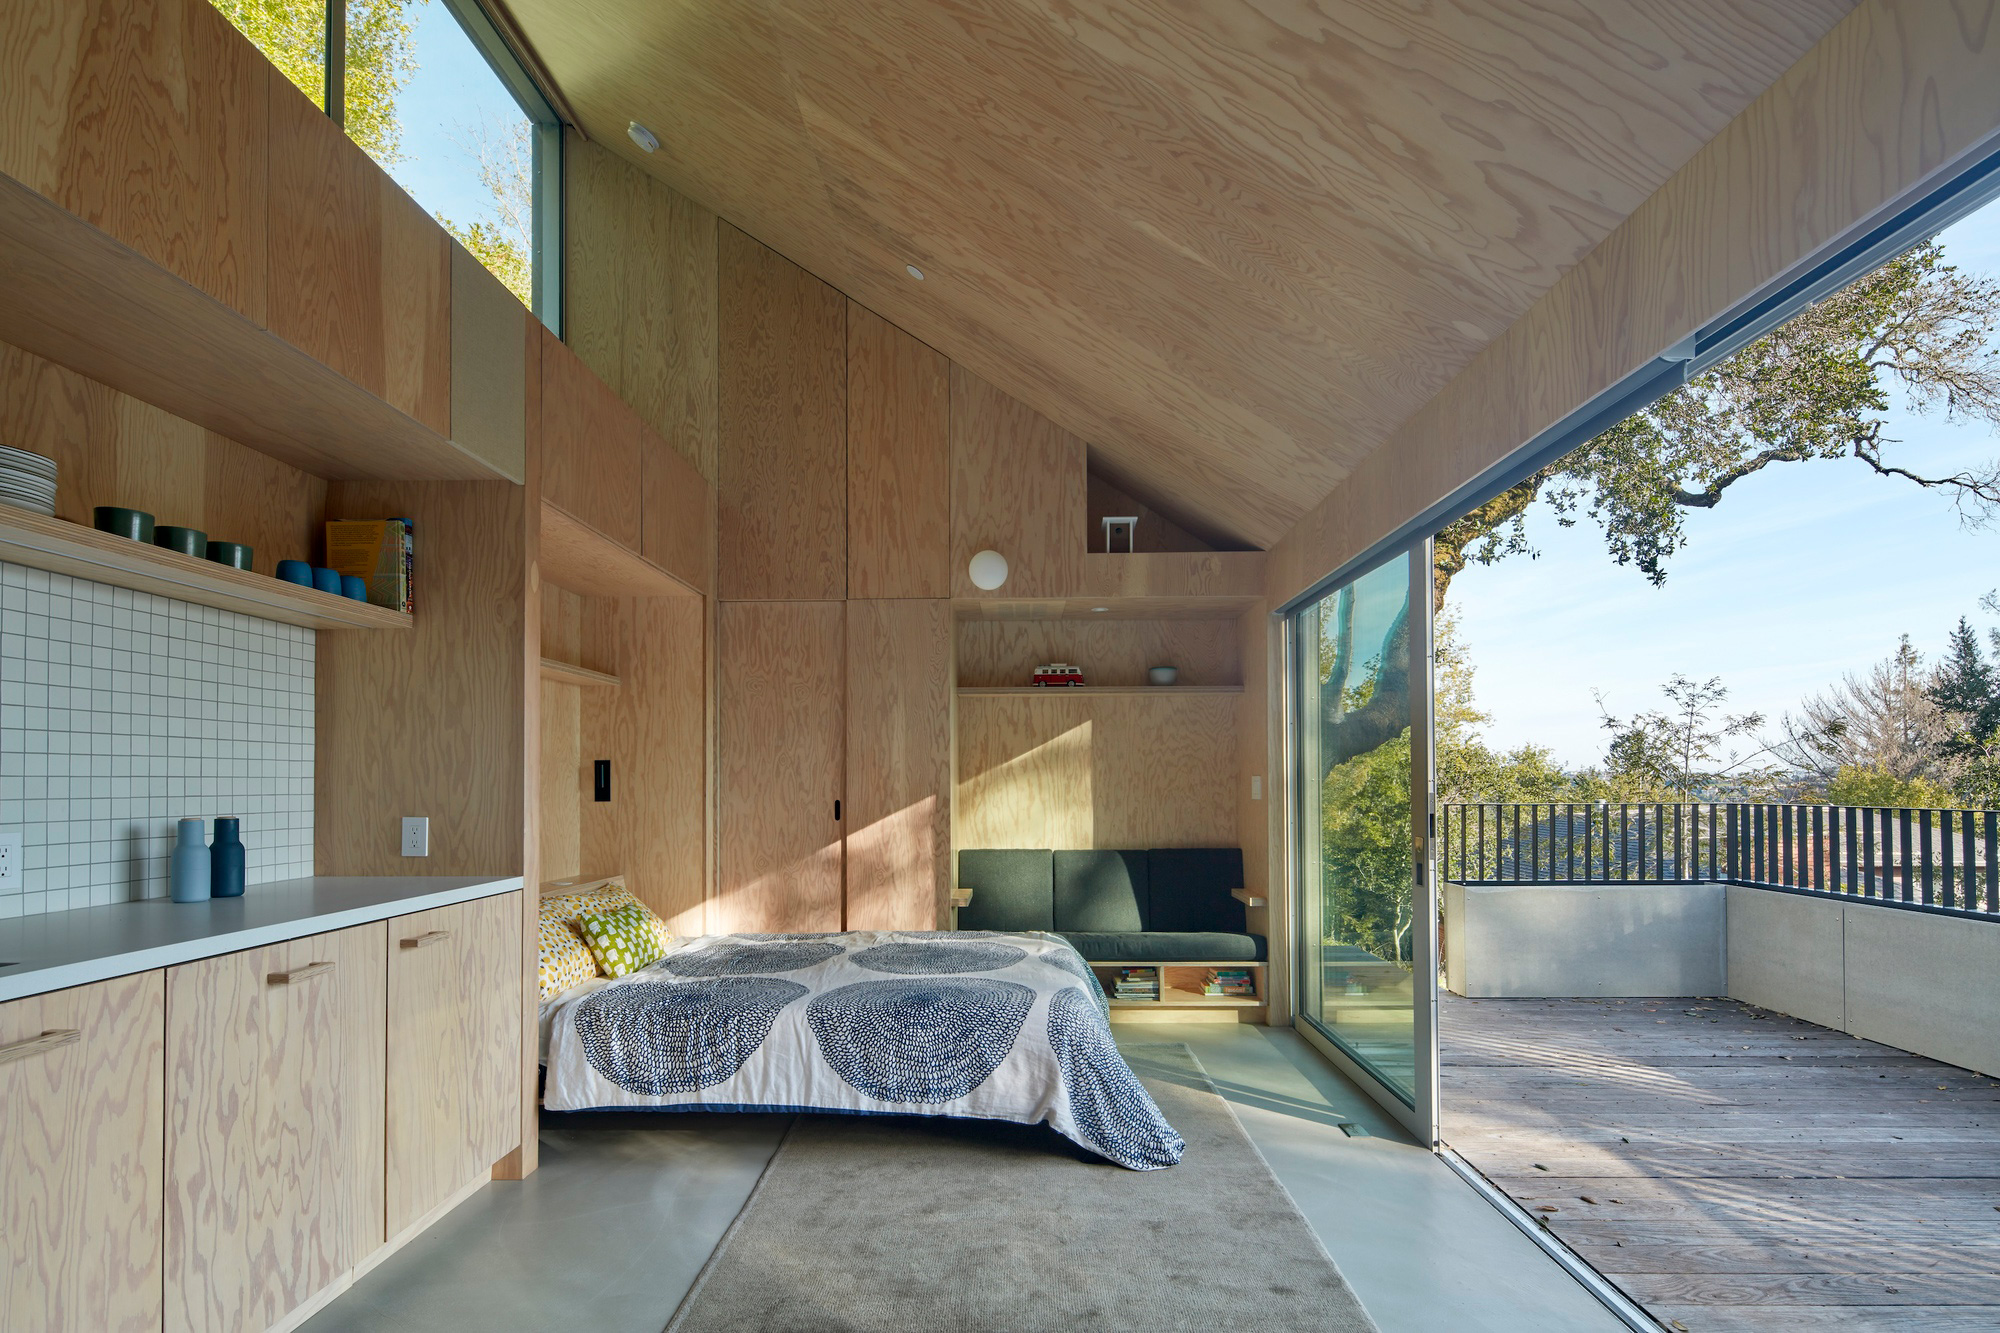 Crest Guesthouse in Marin County, California - Gessato